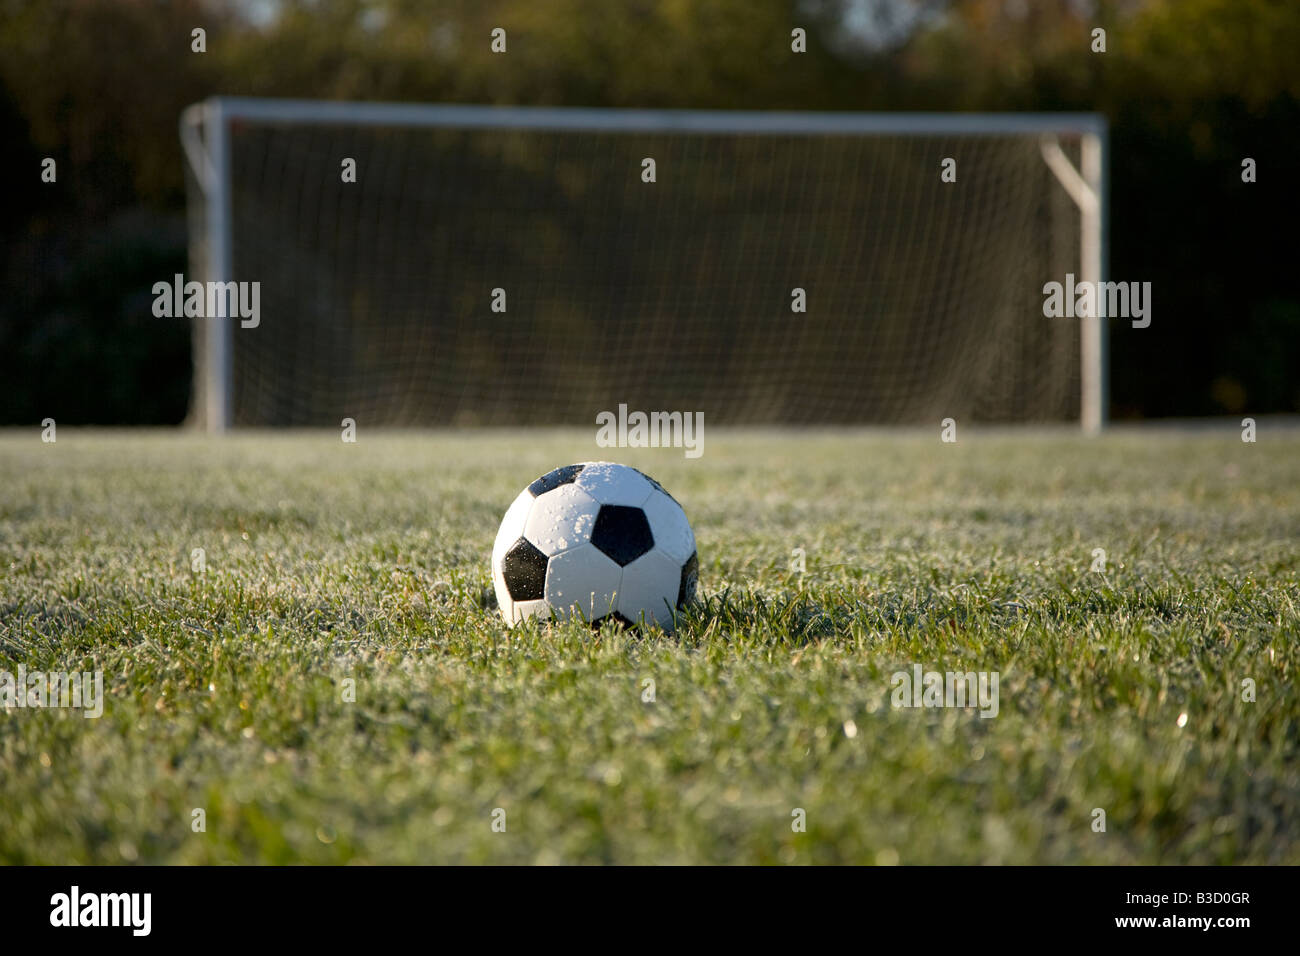 Soccer Ball On Field With Goal In Background Stock Photo Alamy